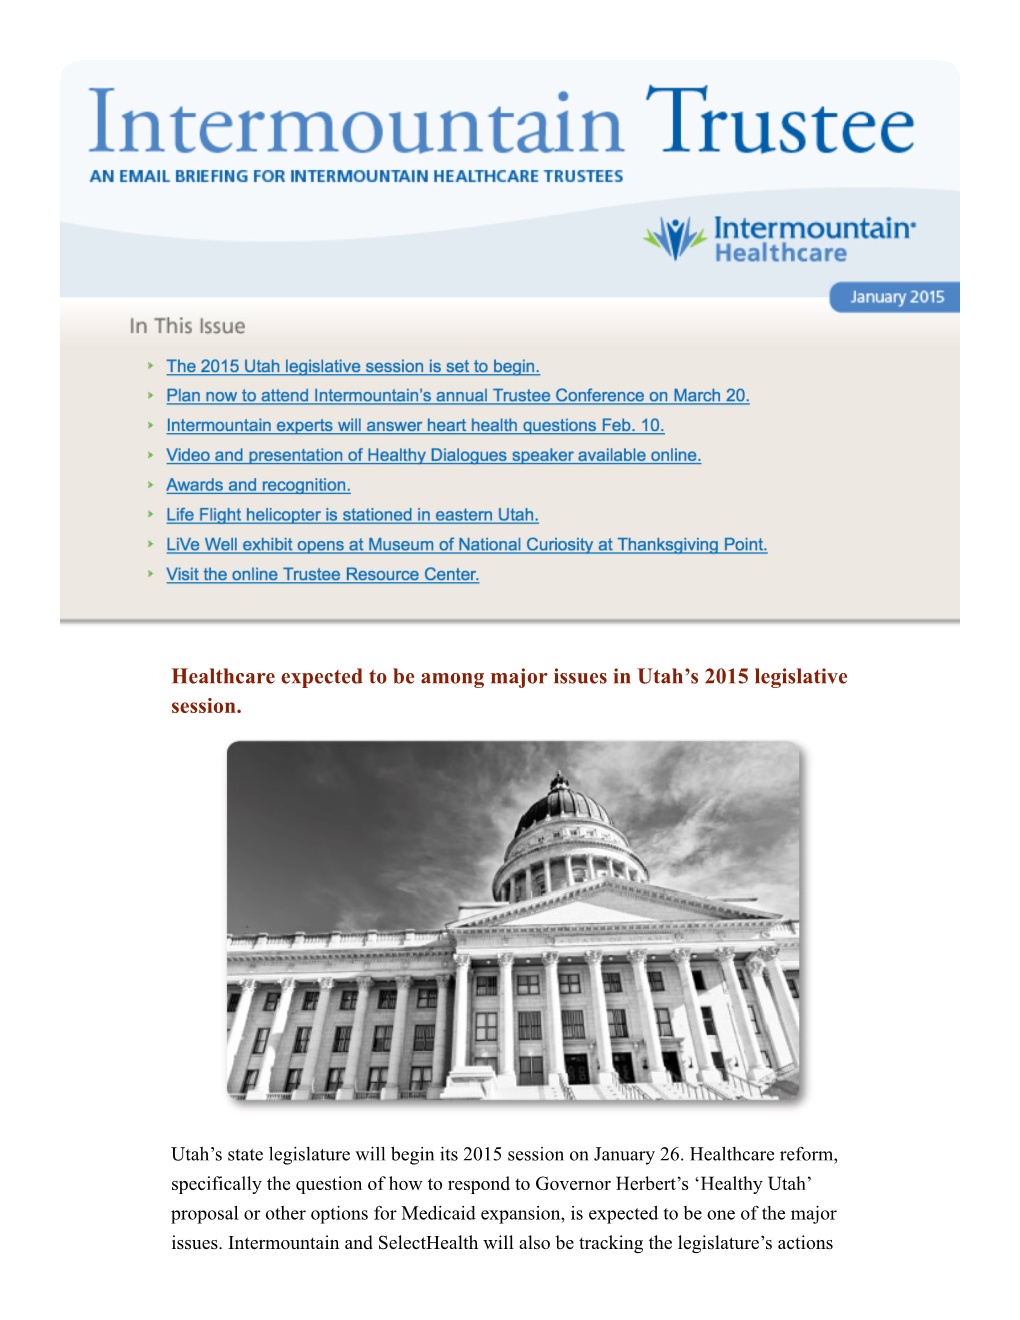 Healthcare Expected to Be Among Major Issues in Utah's 2015 Legislative Session